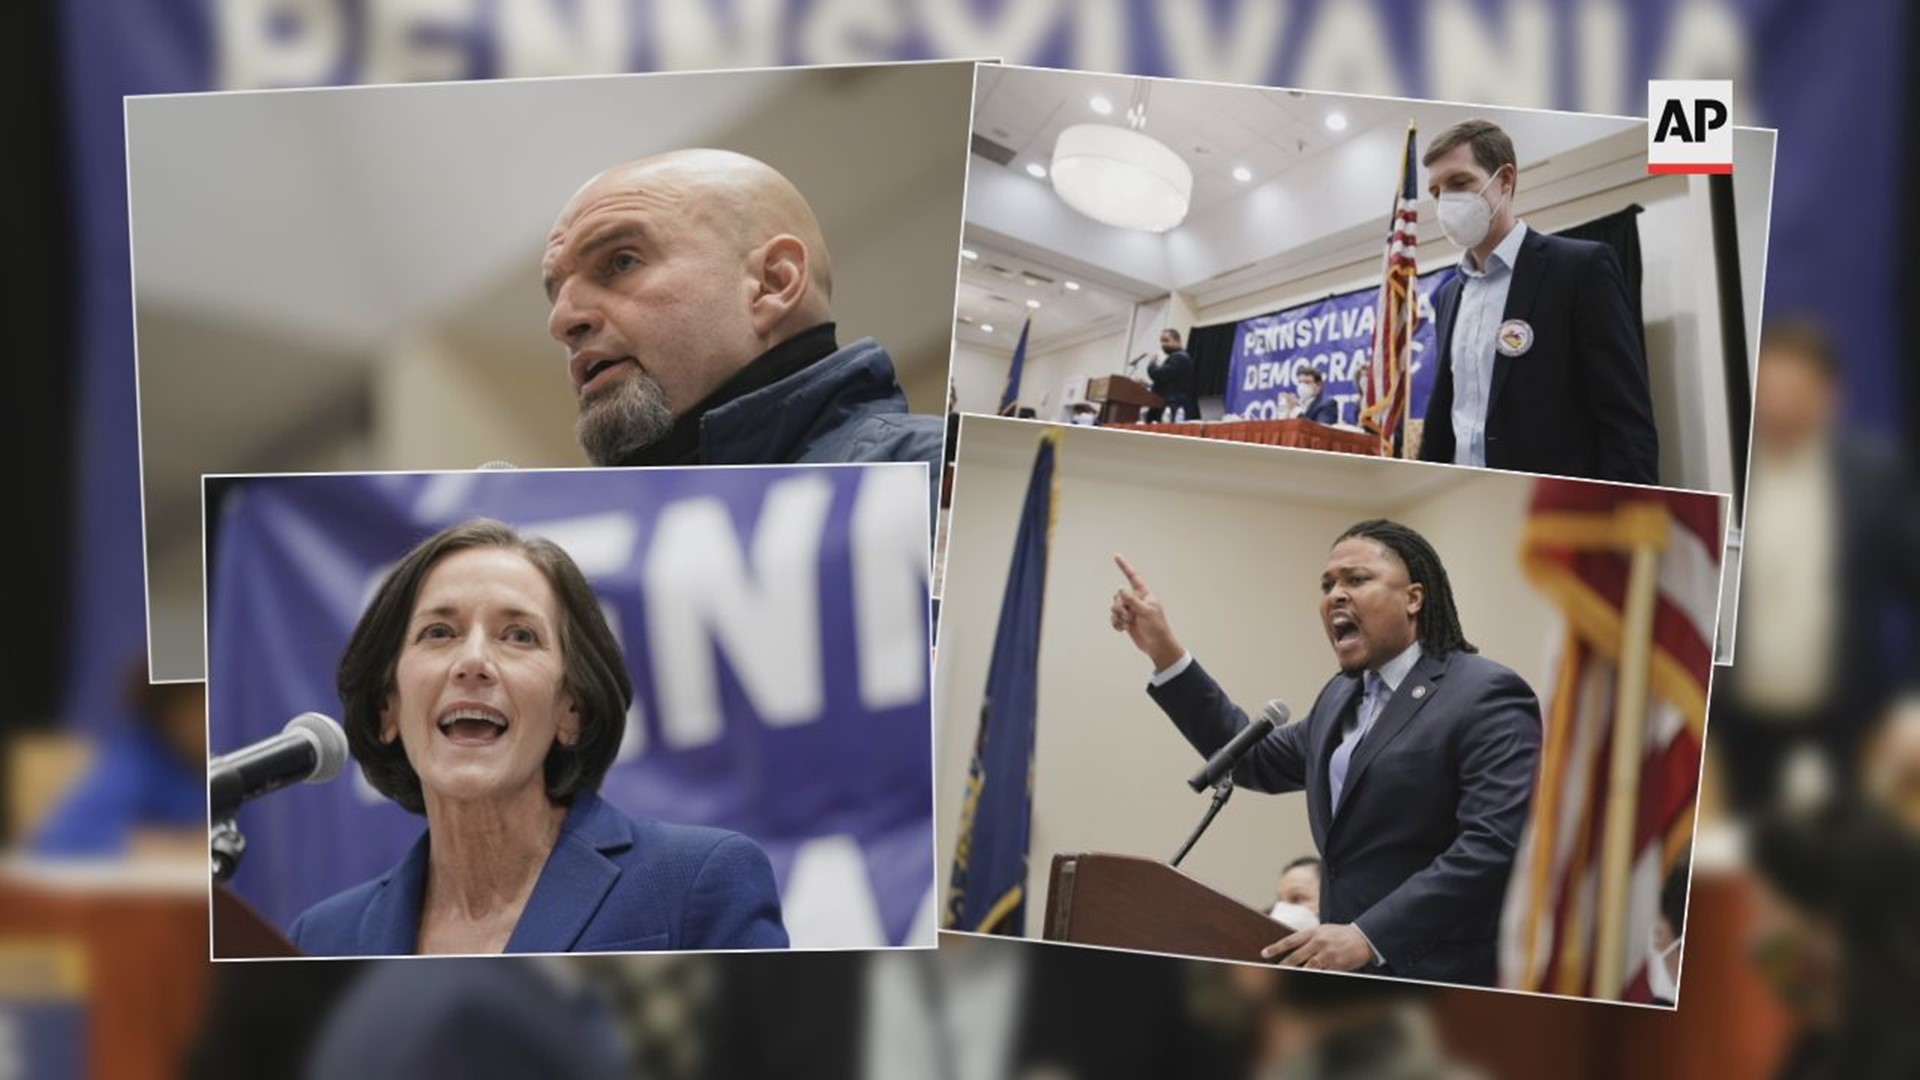 The Pittsburgh-area congressman overwhelmingly received the most votes in the party's endorsement meeting, but fell just short of the magic number.